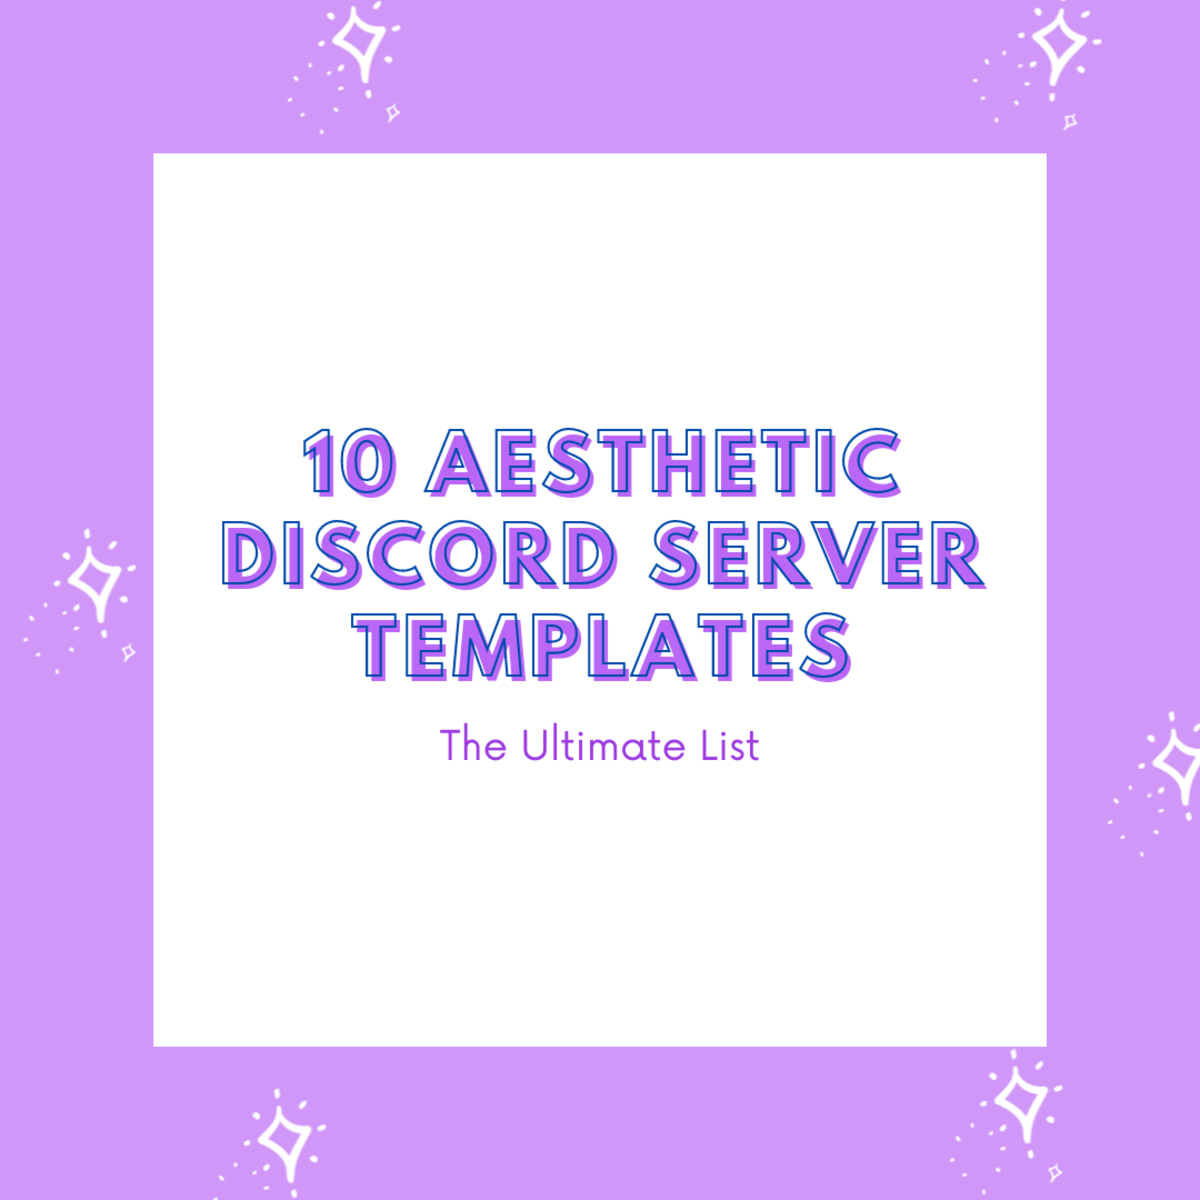 10 Aesthetic Discord Server Templates: The Ultimate List